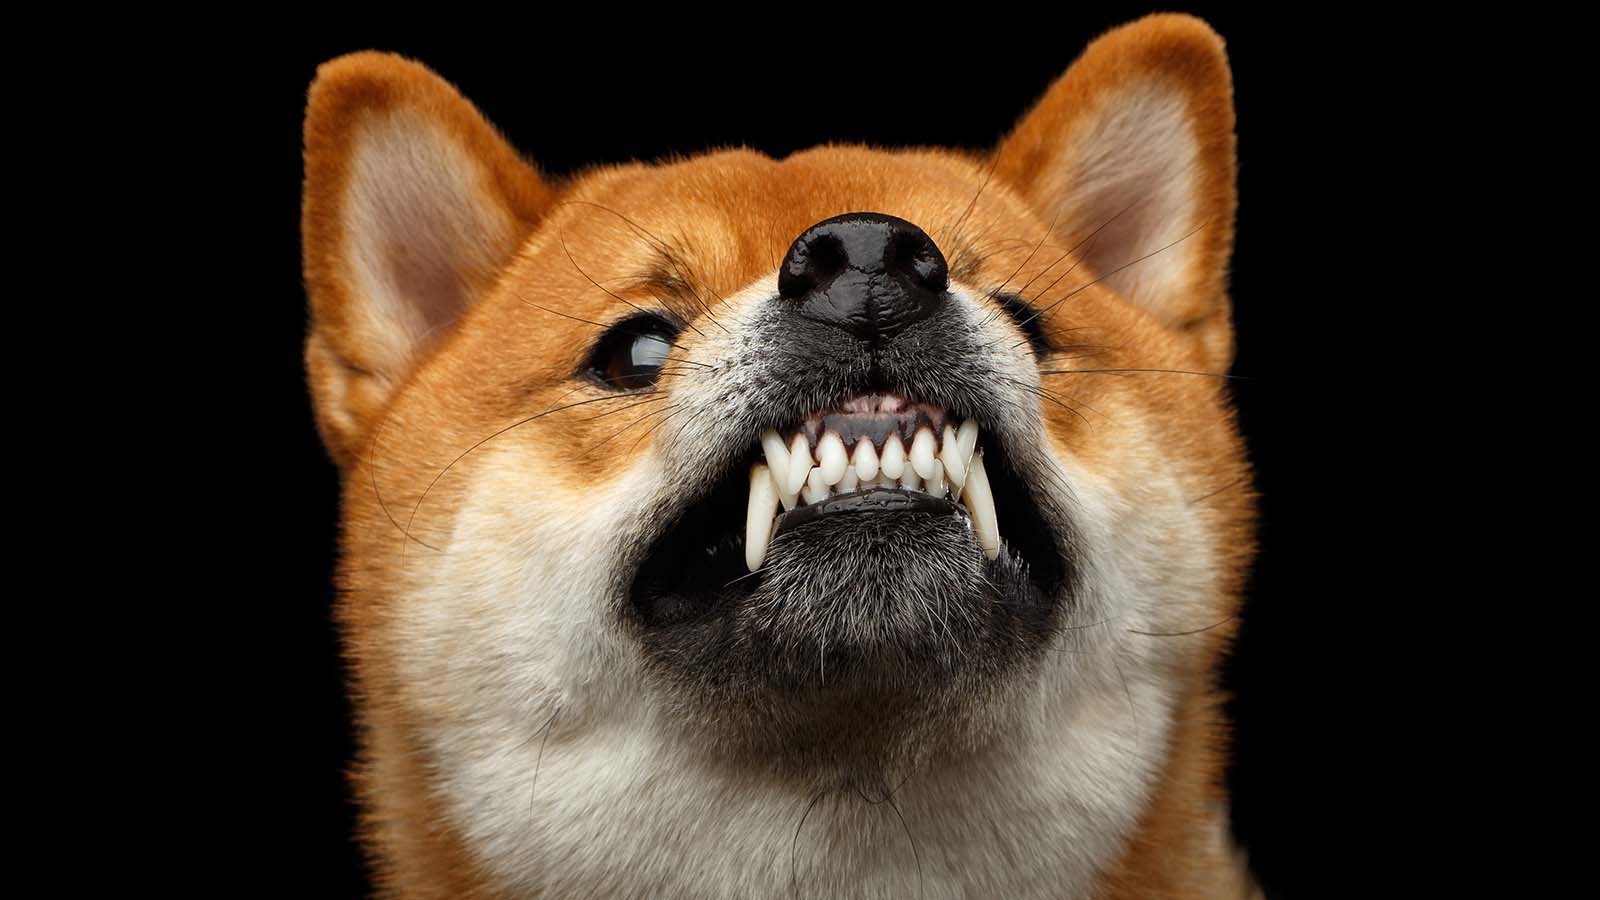 Dogecoin rival Shiba token loses 32,832 holders in only one day: Report 4